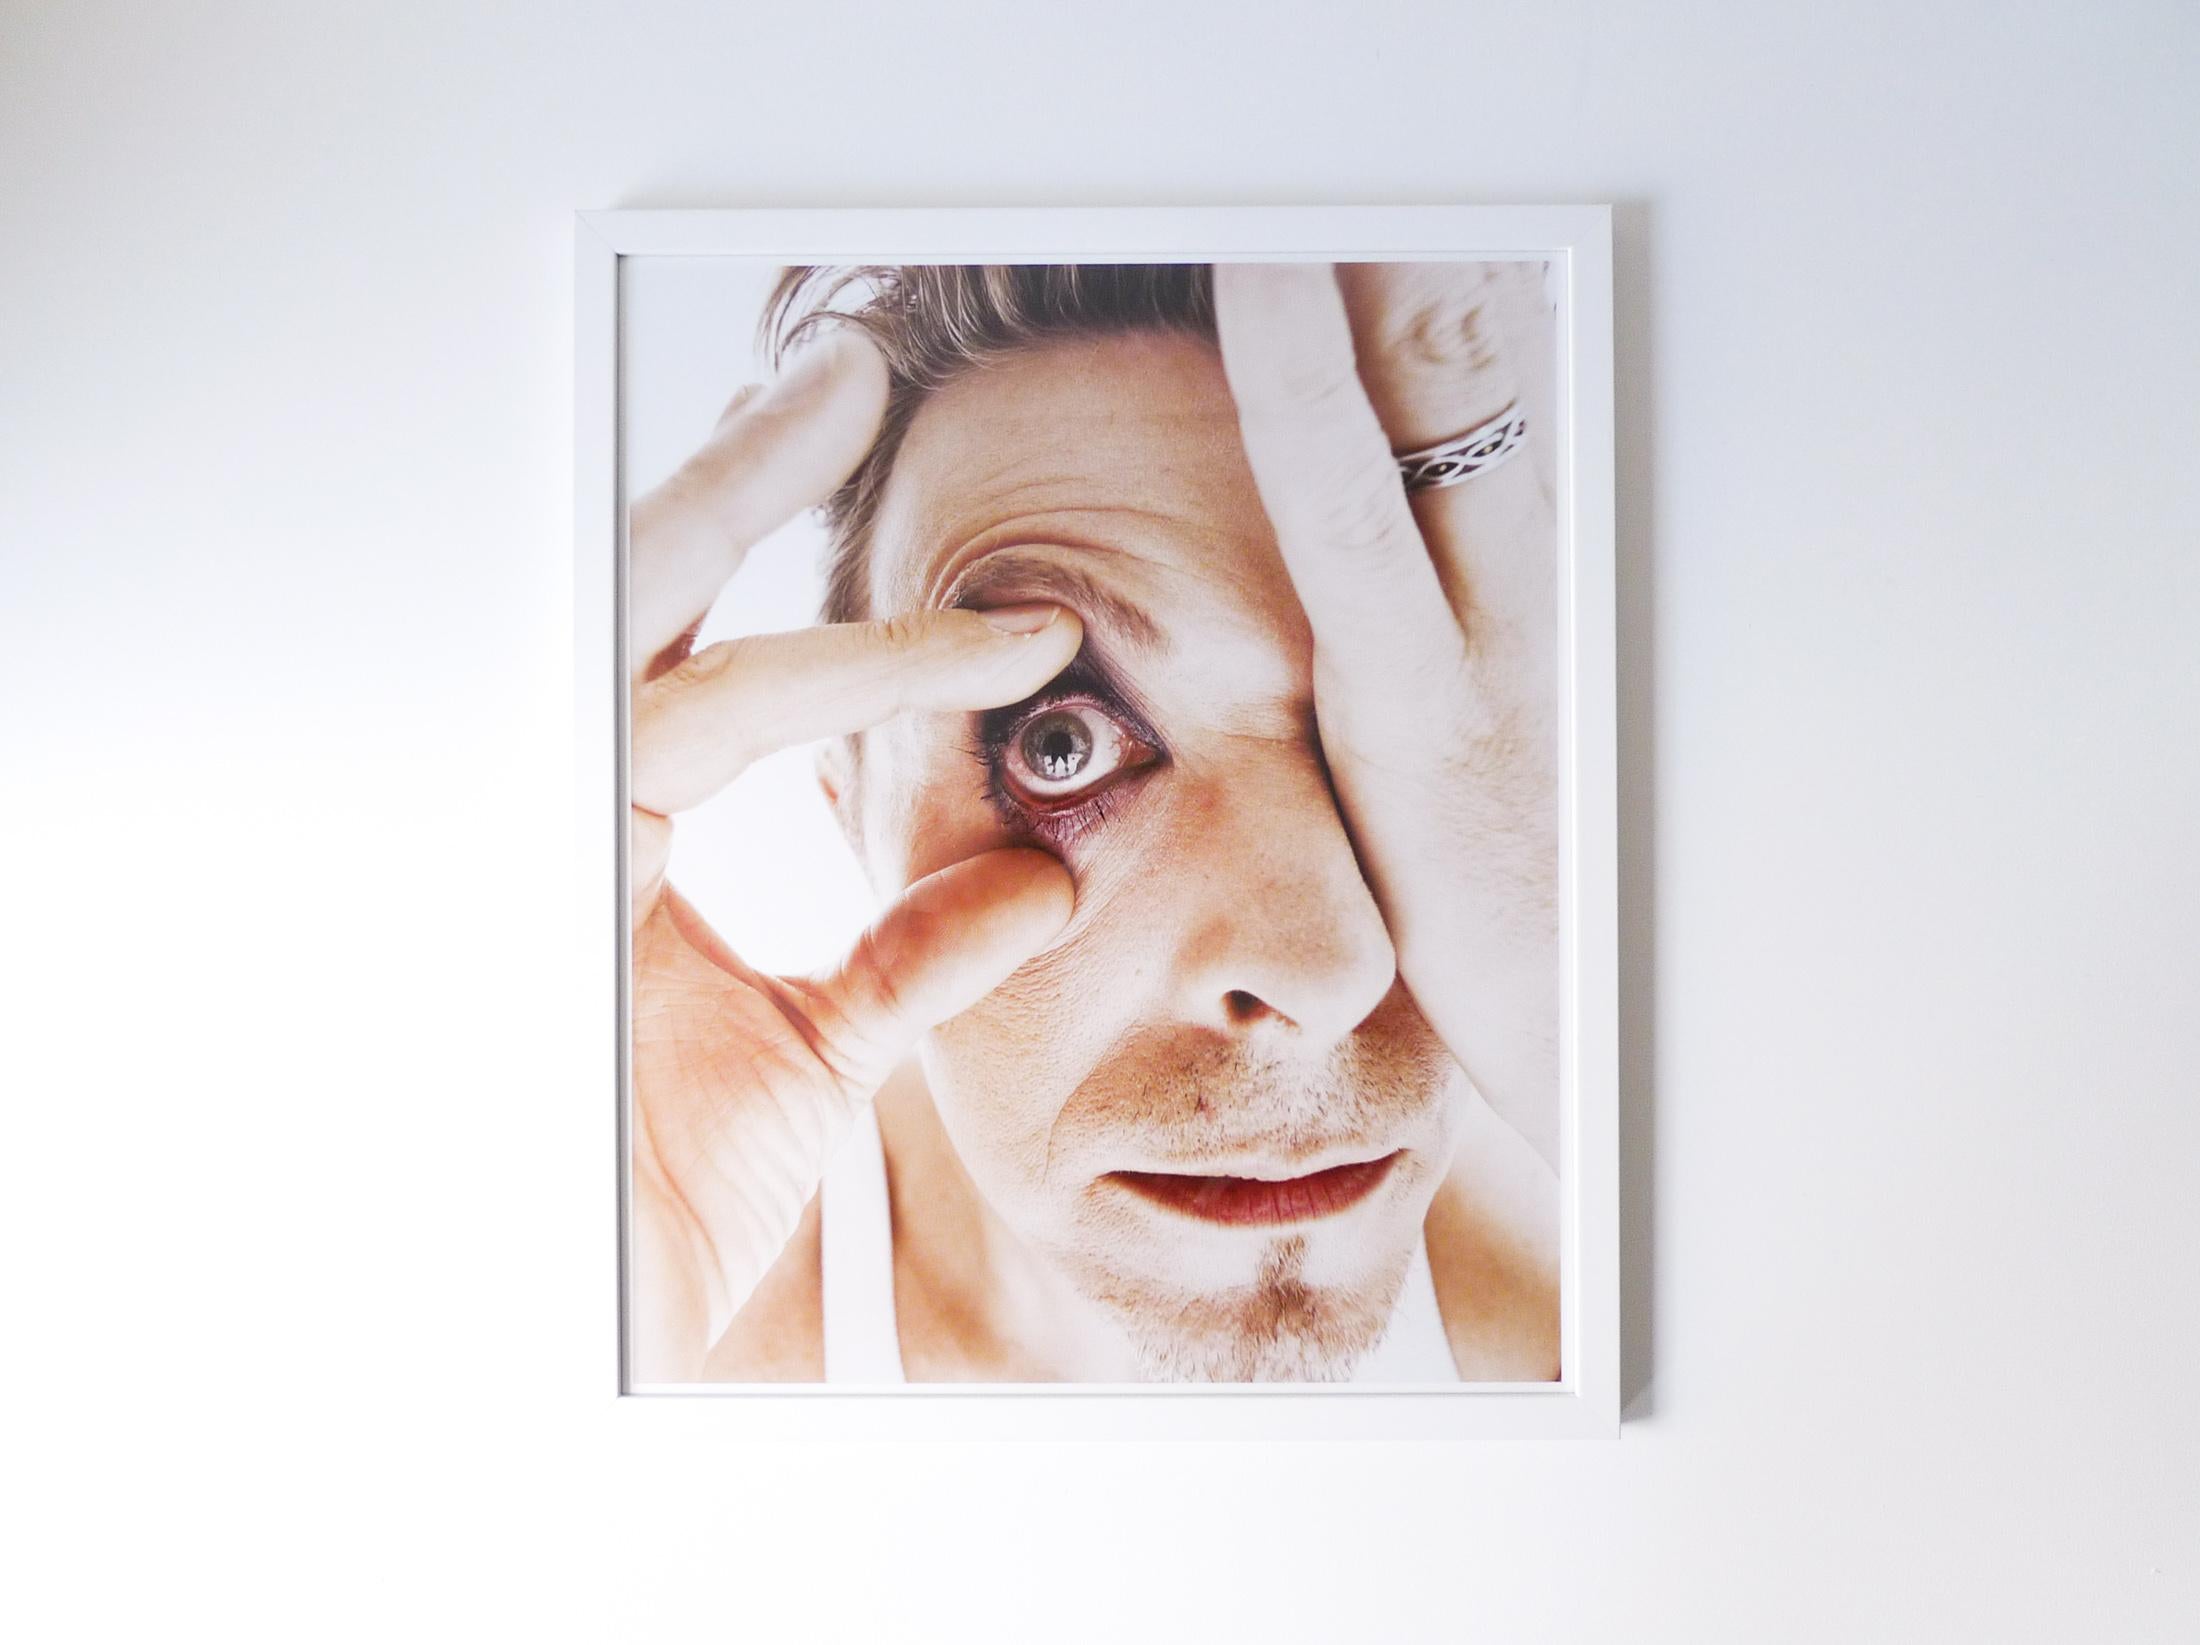 Limited Edition Signed “Bowie’s Eye